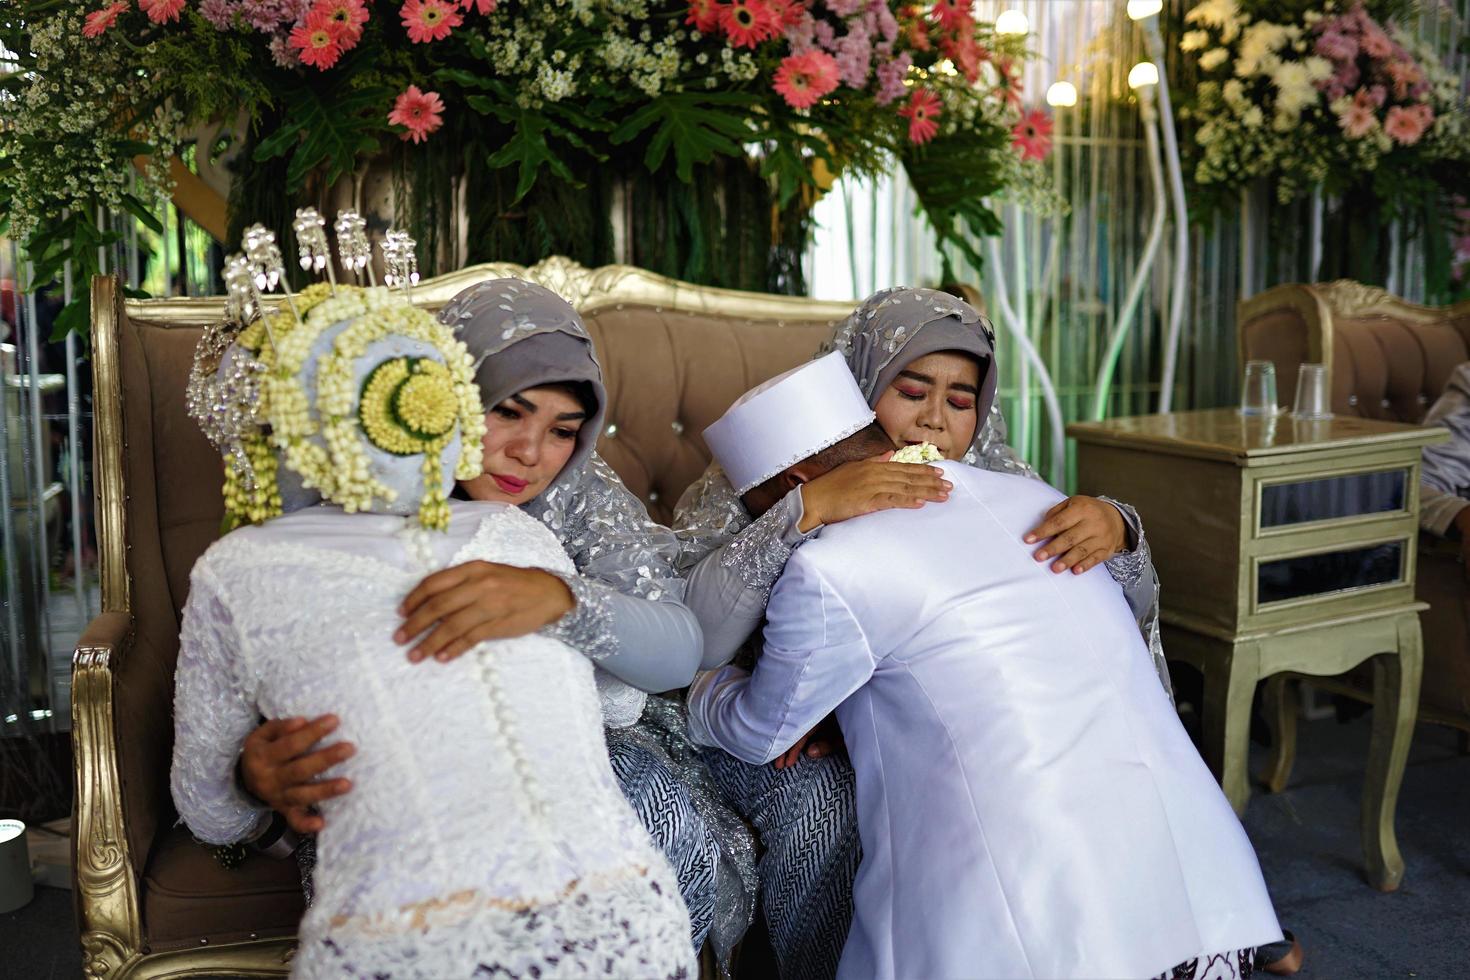 Bandung, West Java, Indonesia, 2021- Muslim groom and bride at the Sungkeman traditional Indonesian wedding ceremony photo